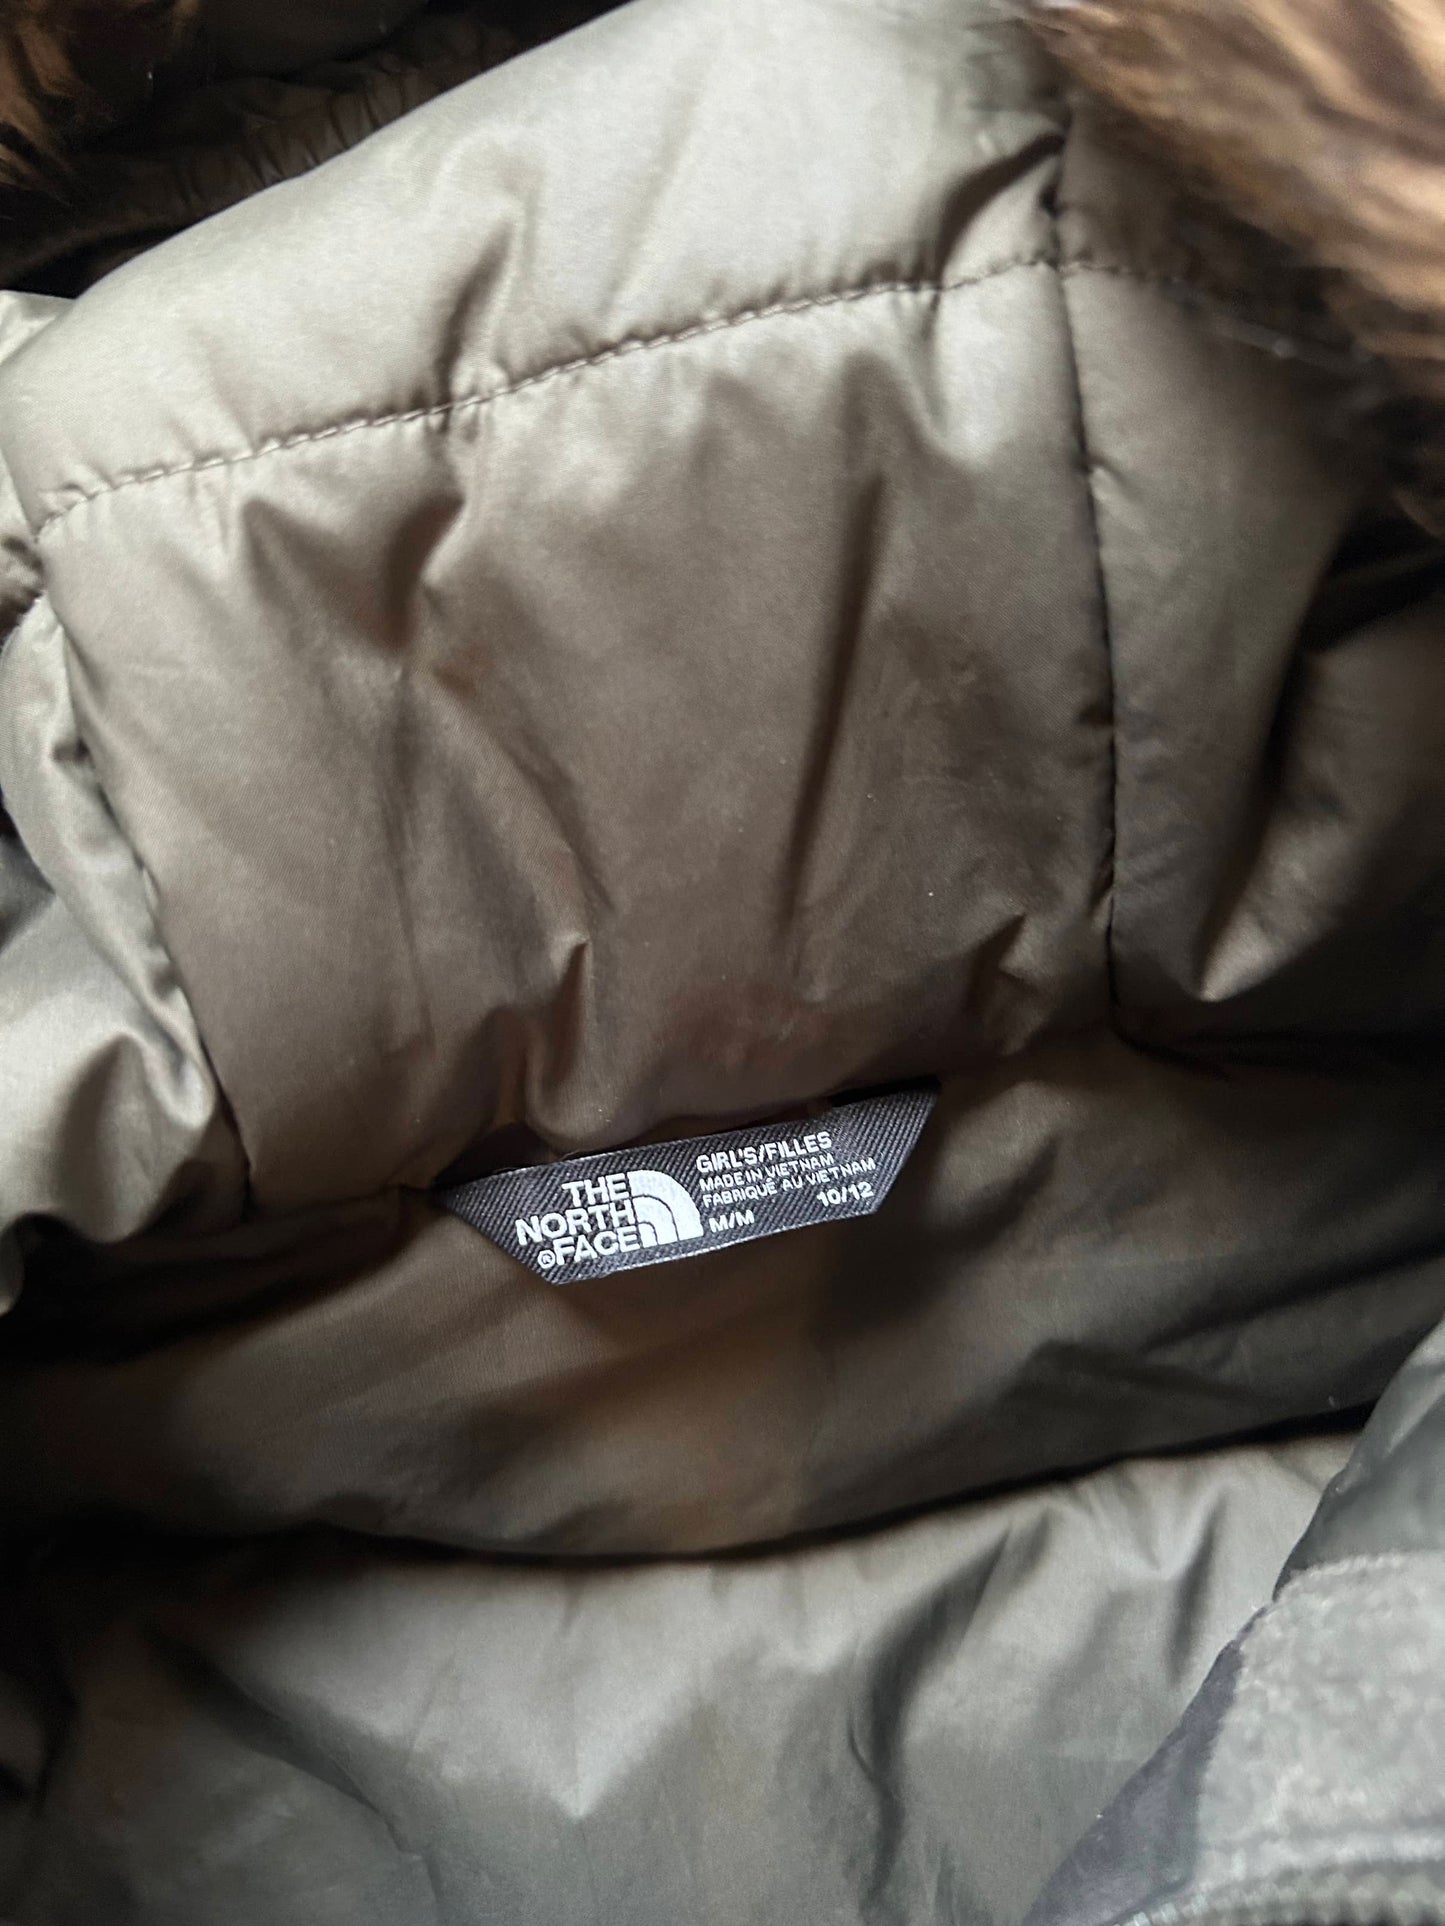 Green North Face Arctic Parka with Fur Lined Hood - 550 Dryvent (Pre-Loved) Size 10/12 Jacket